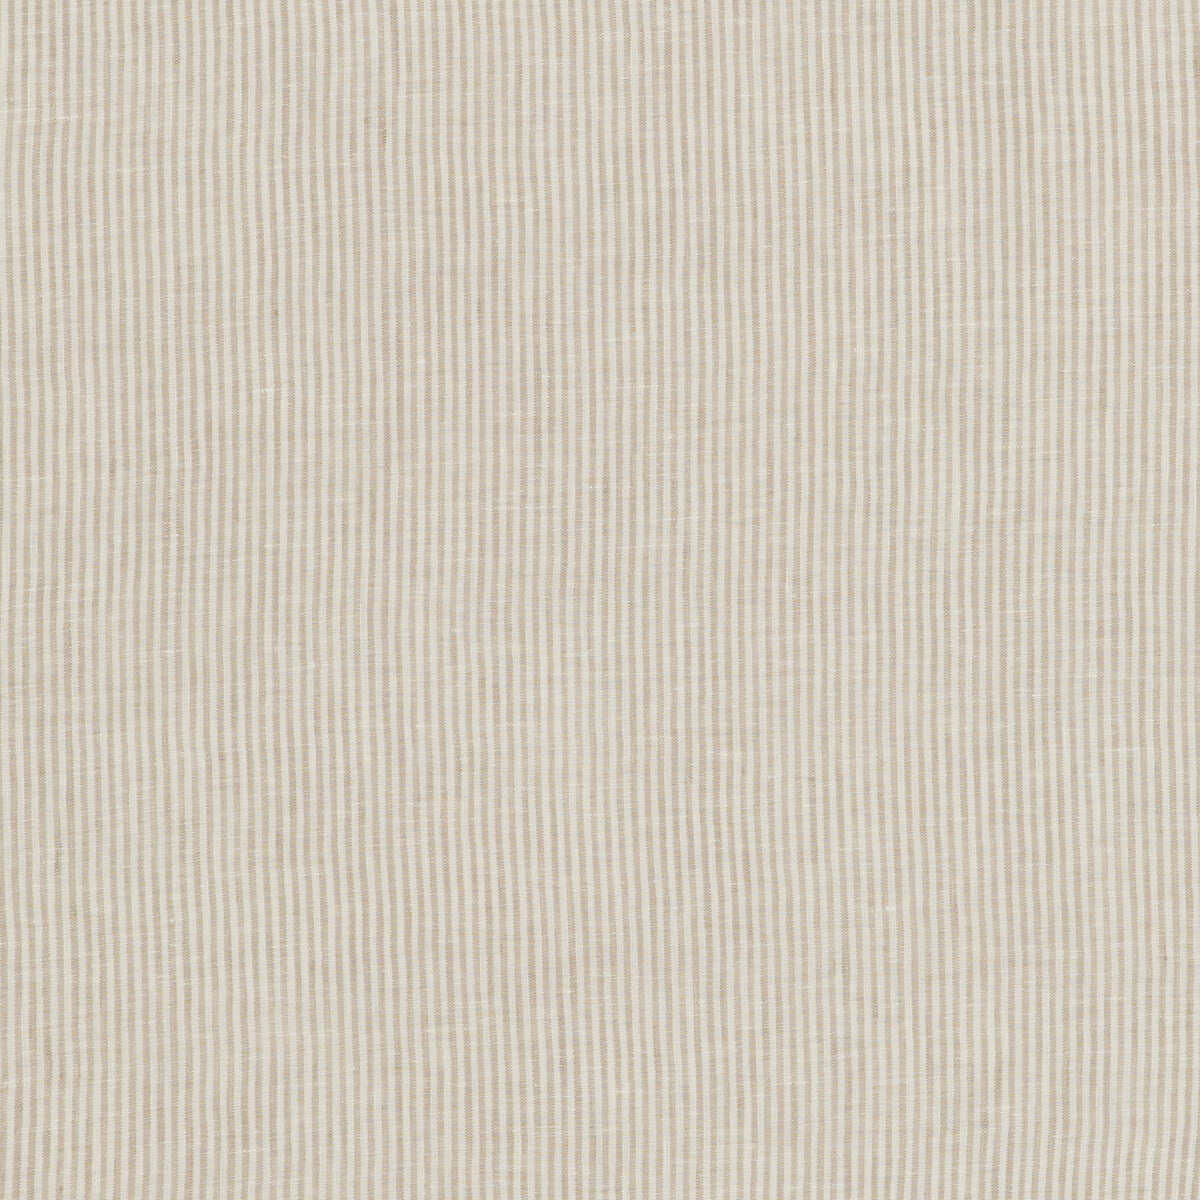 Nala Ticking fabric in linen color - pattern ED85331.110.0 - by Threads in the Nala Linens collection